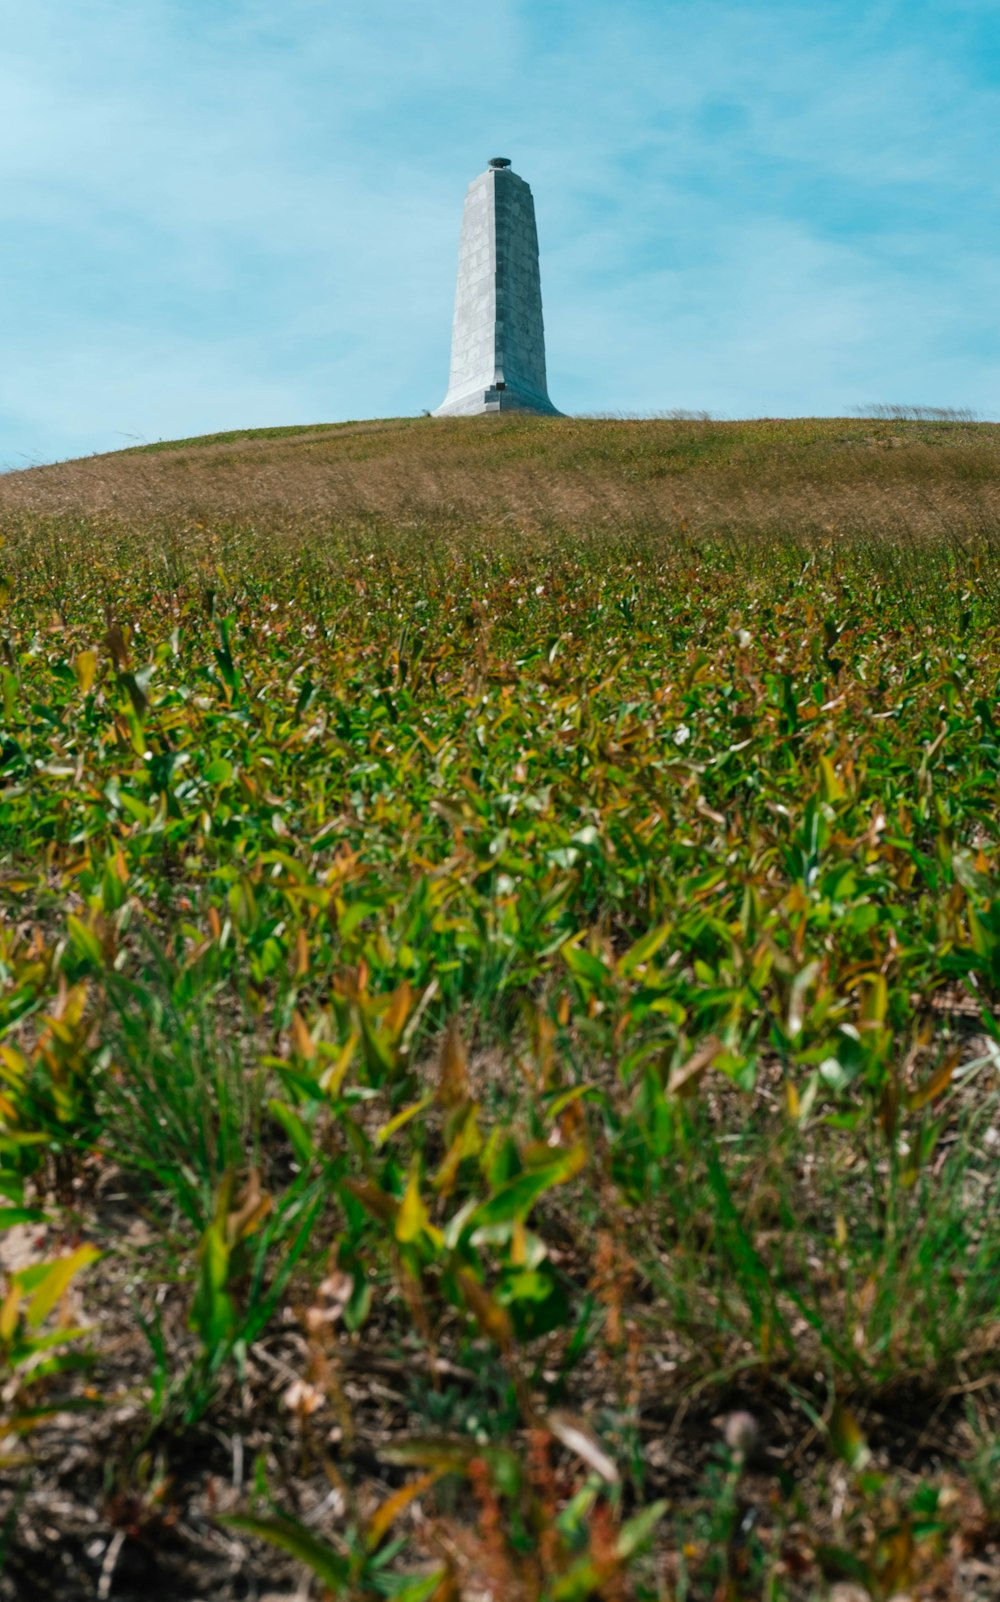 a grassy field with a tall tower on top of it